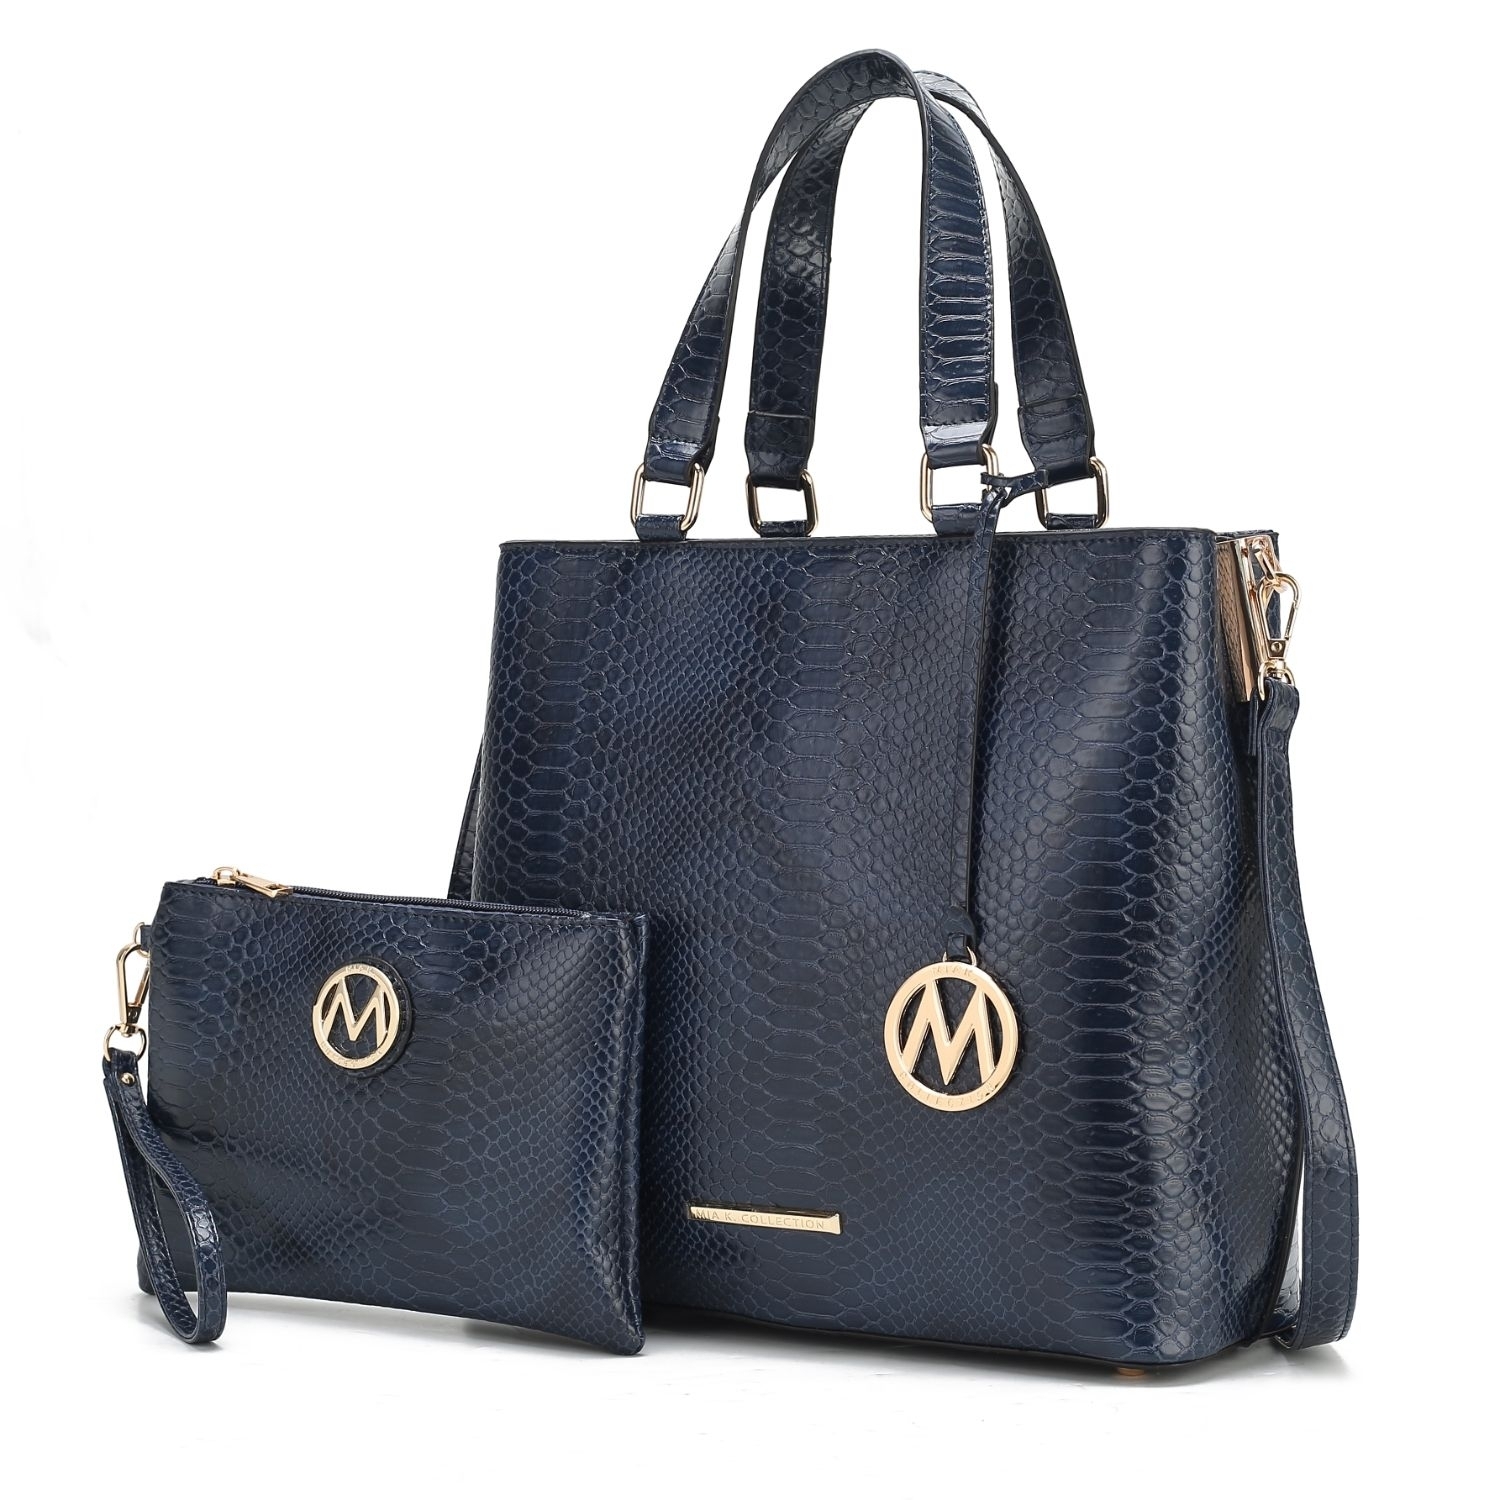 MKF Collection Beryl Snake-embossed Vegan Leather Women's Tote Handbag With Wristlet - 2 Pieces, By Mia K - Navy